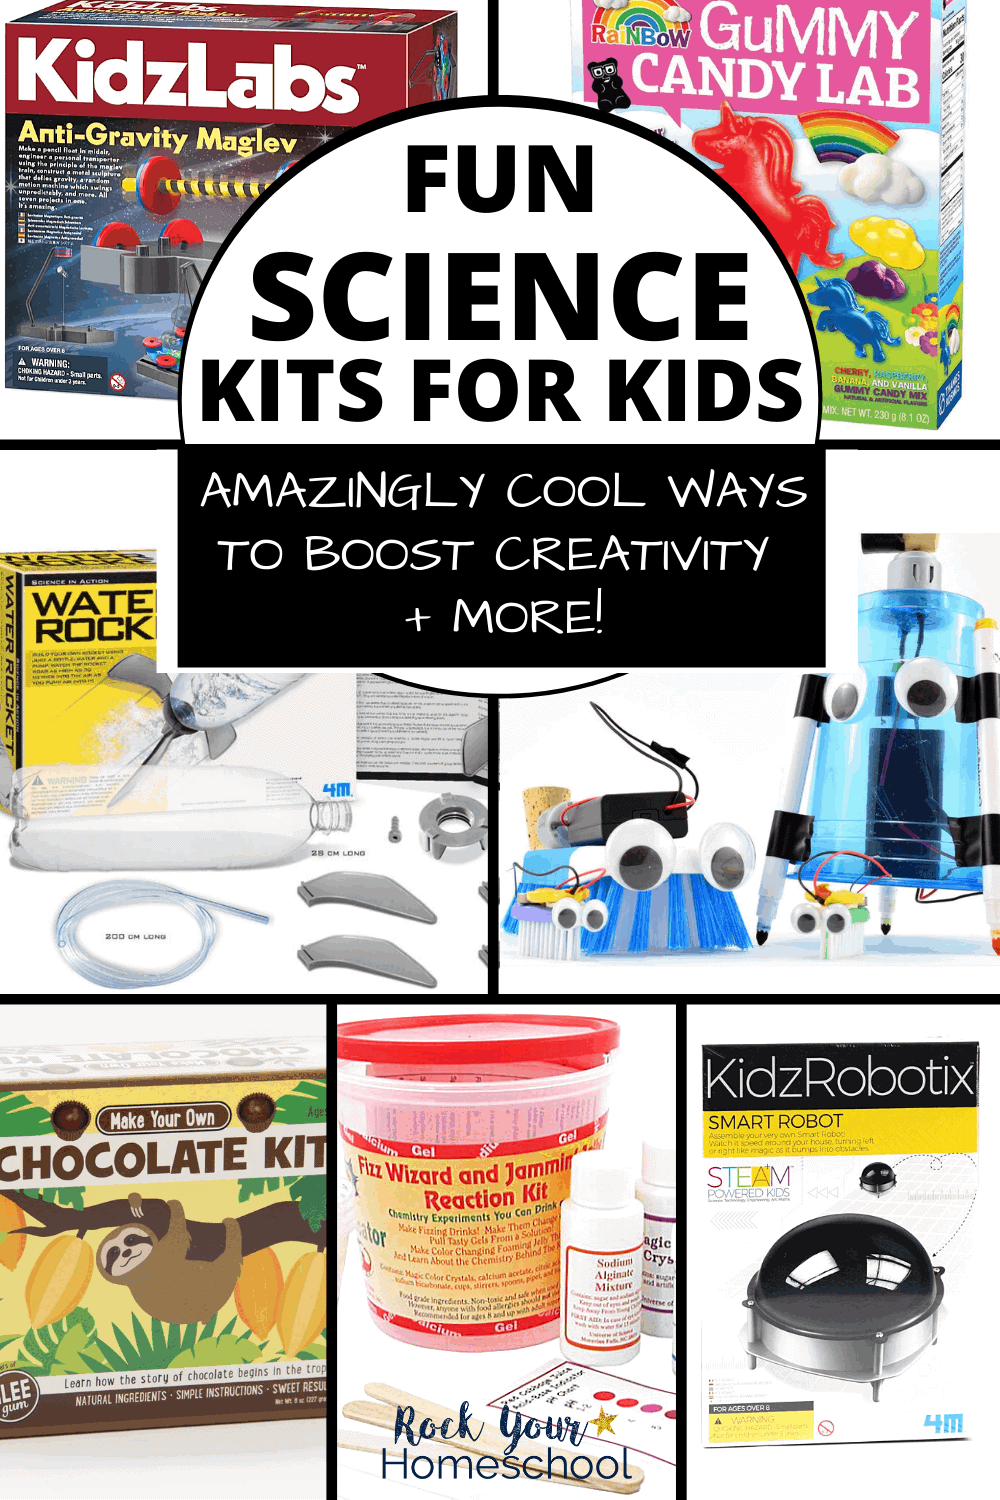 The Most Fun Science Kits for Kids